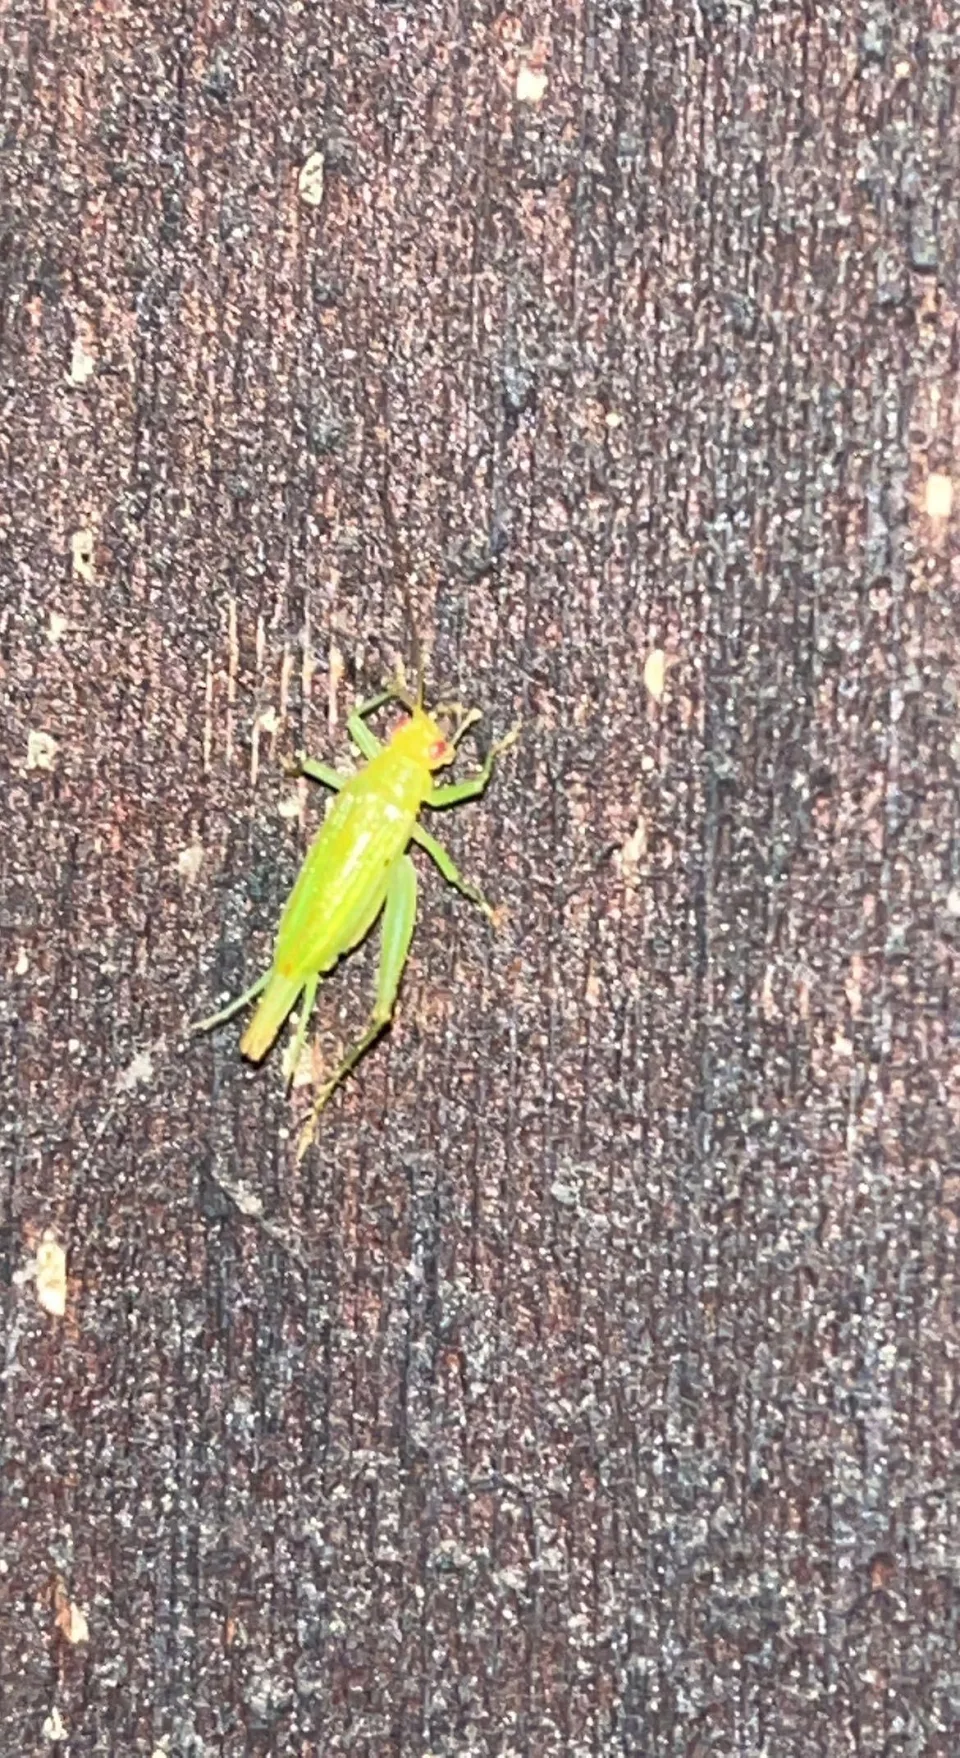 Anyone know the name of this corn looking insect?